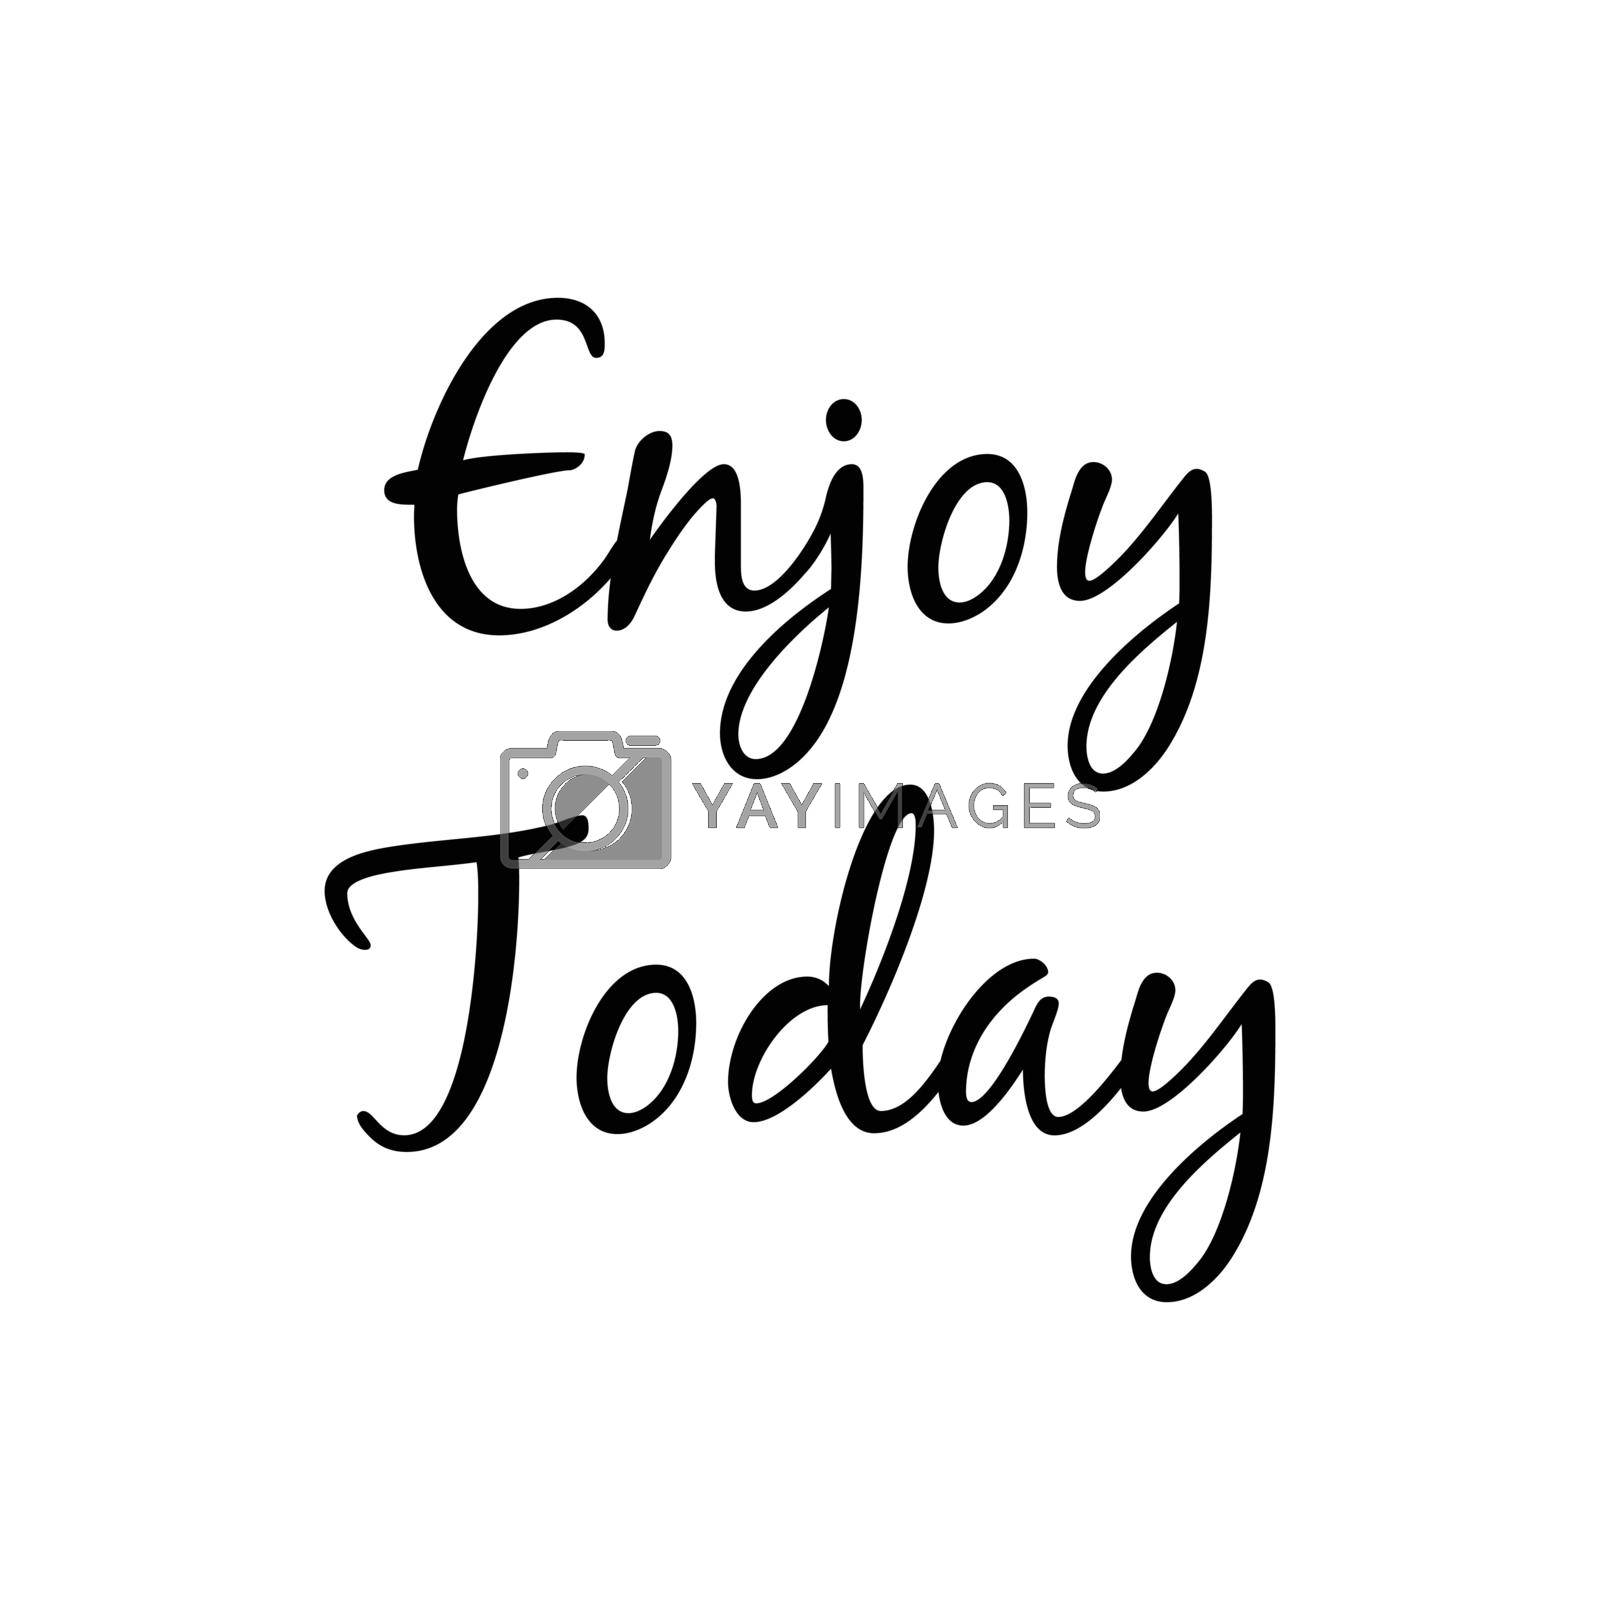 Royalty free image of Enjoy Today motivation quote vector text saying by elinnet